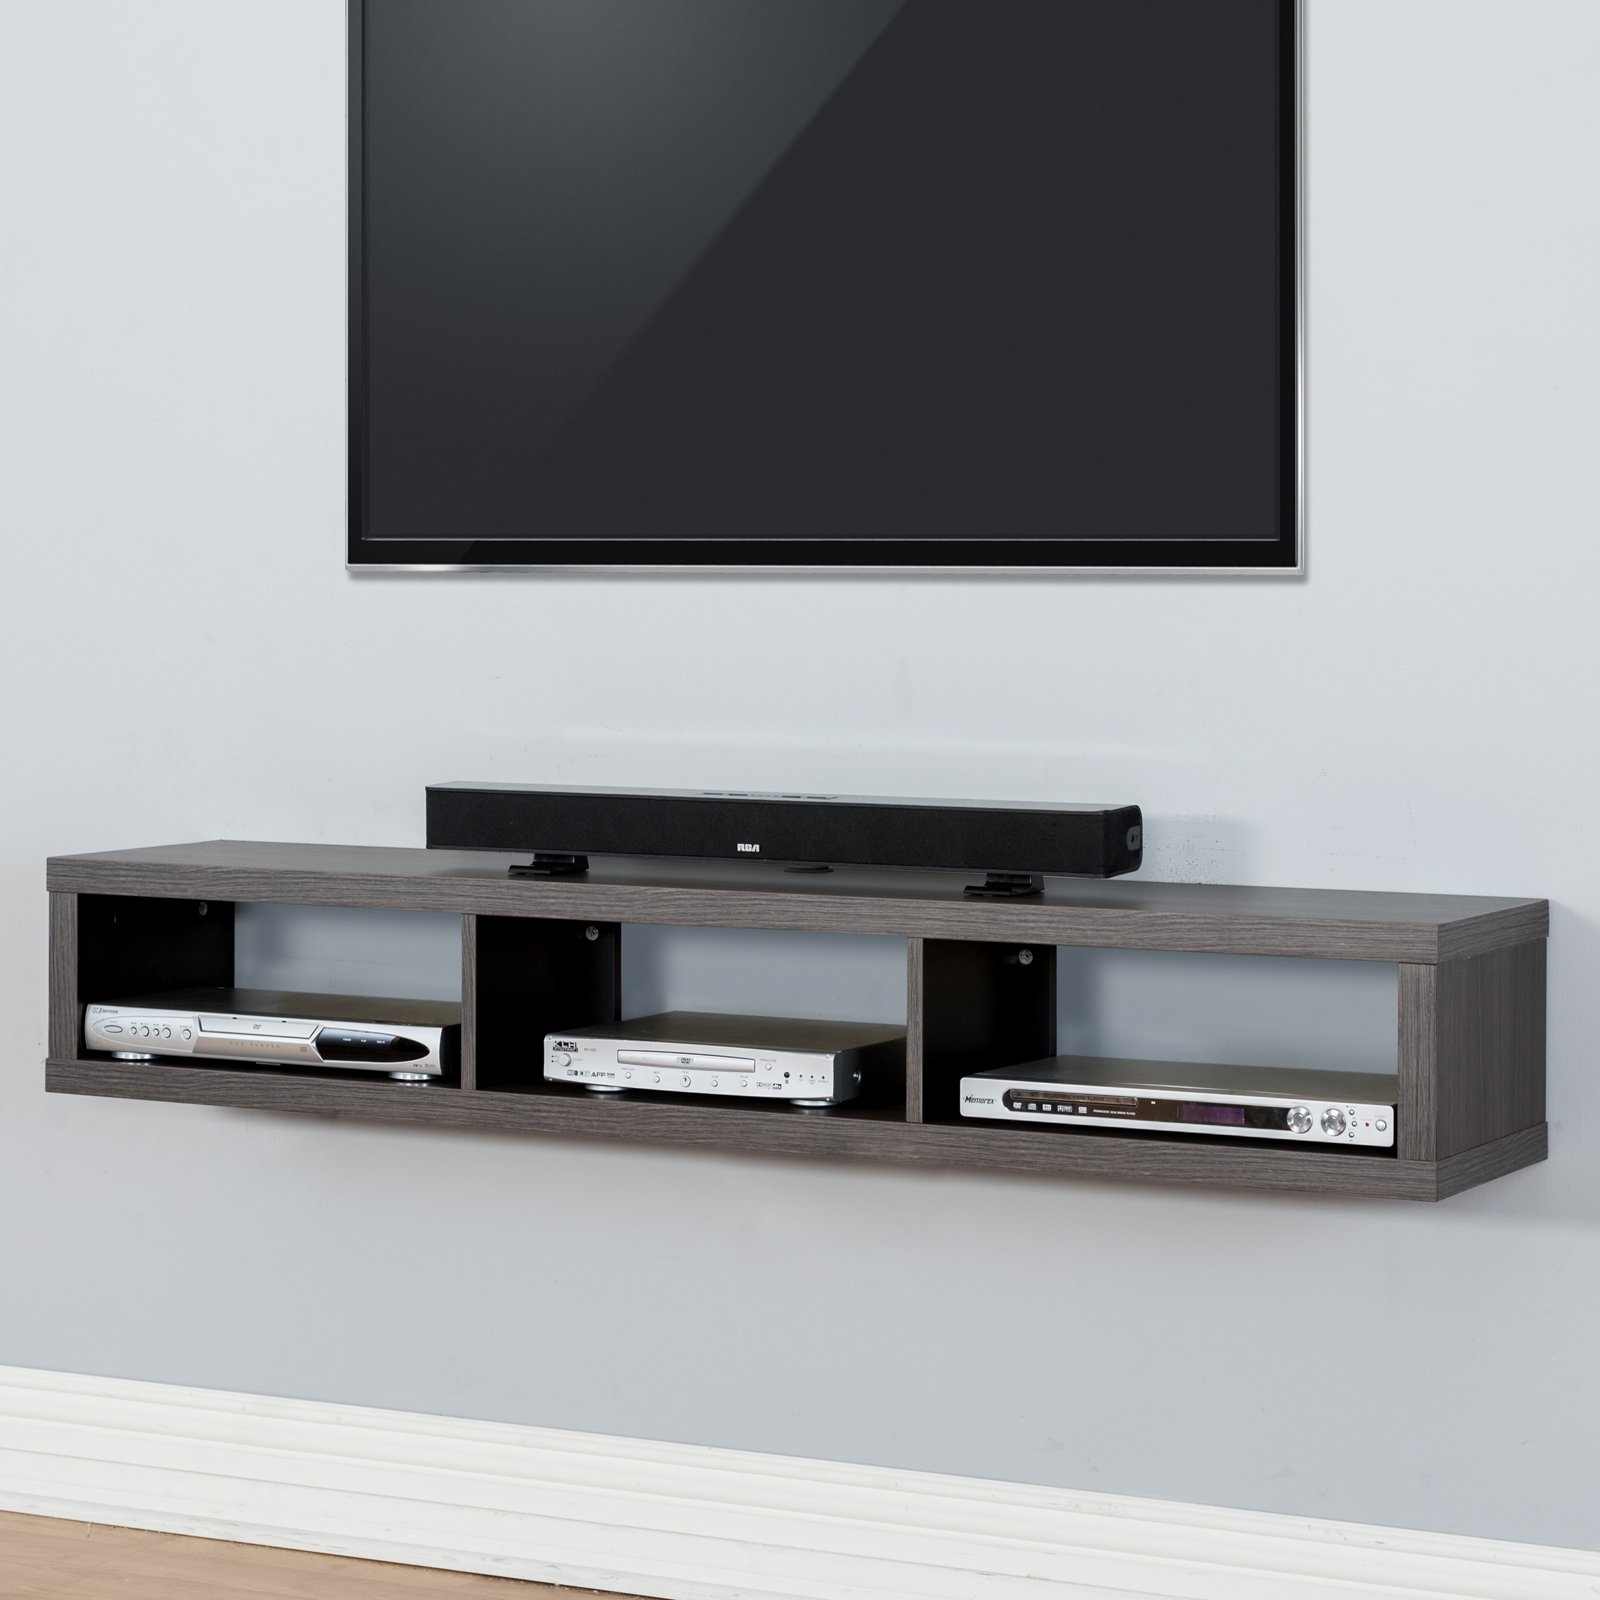 Floating Entertainment Center with Fireplace Luxury Martin Furniture Shallow Wall Mounted Tv Shelf